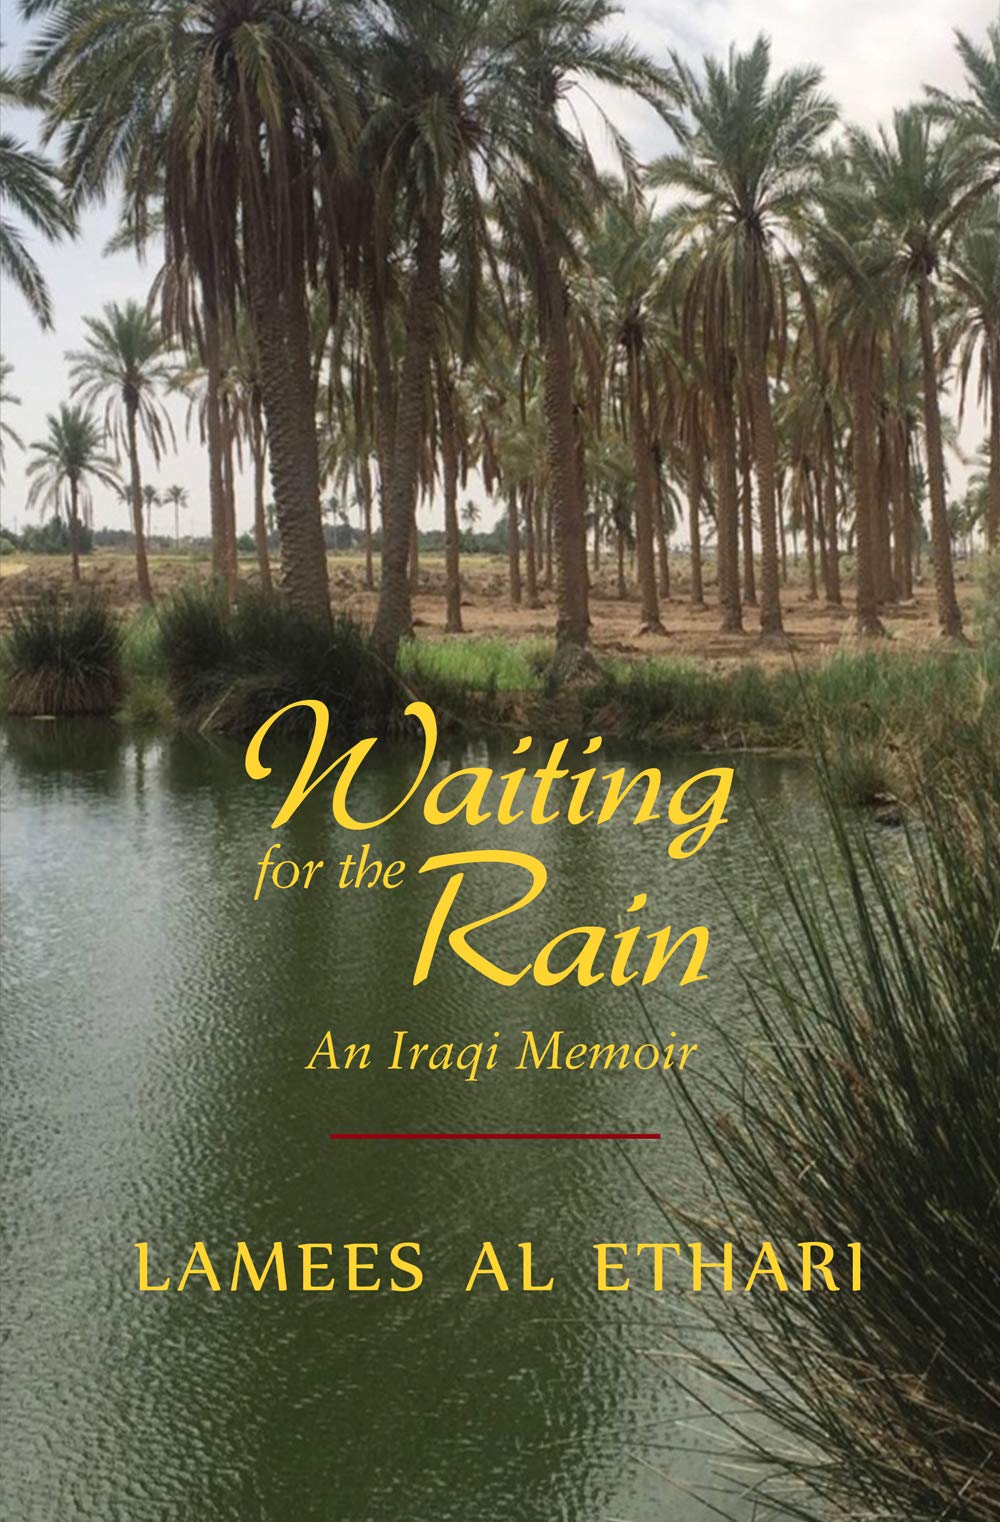 Photo of book cover for Waiting for the Rain.